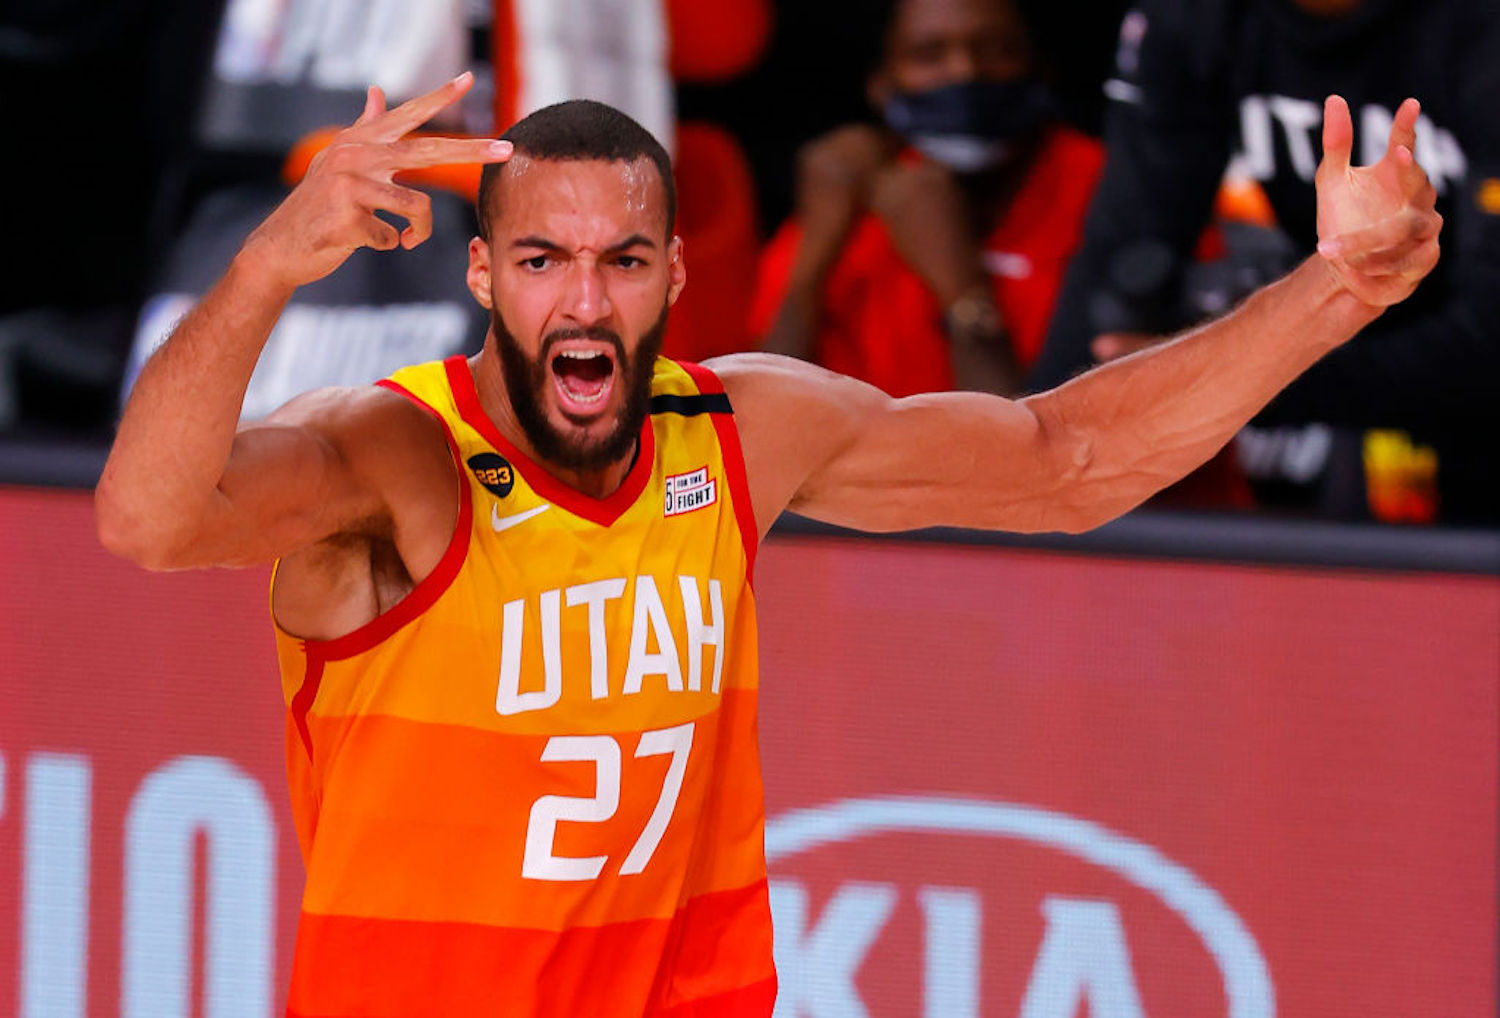 Rudy Gobert is one of the best centers in the NBA, and he was just rewarded with the largest contract for a center in league history.